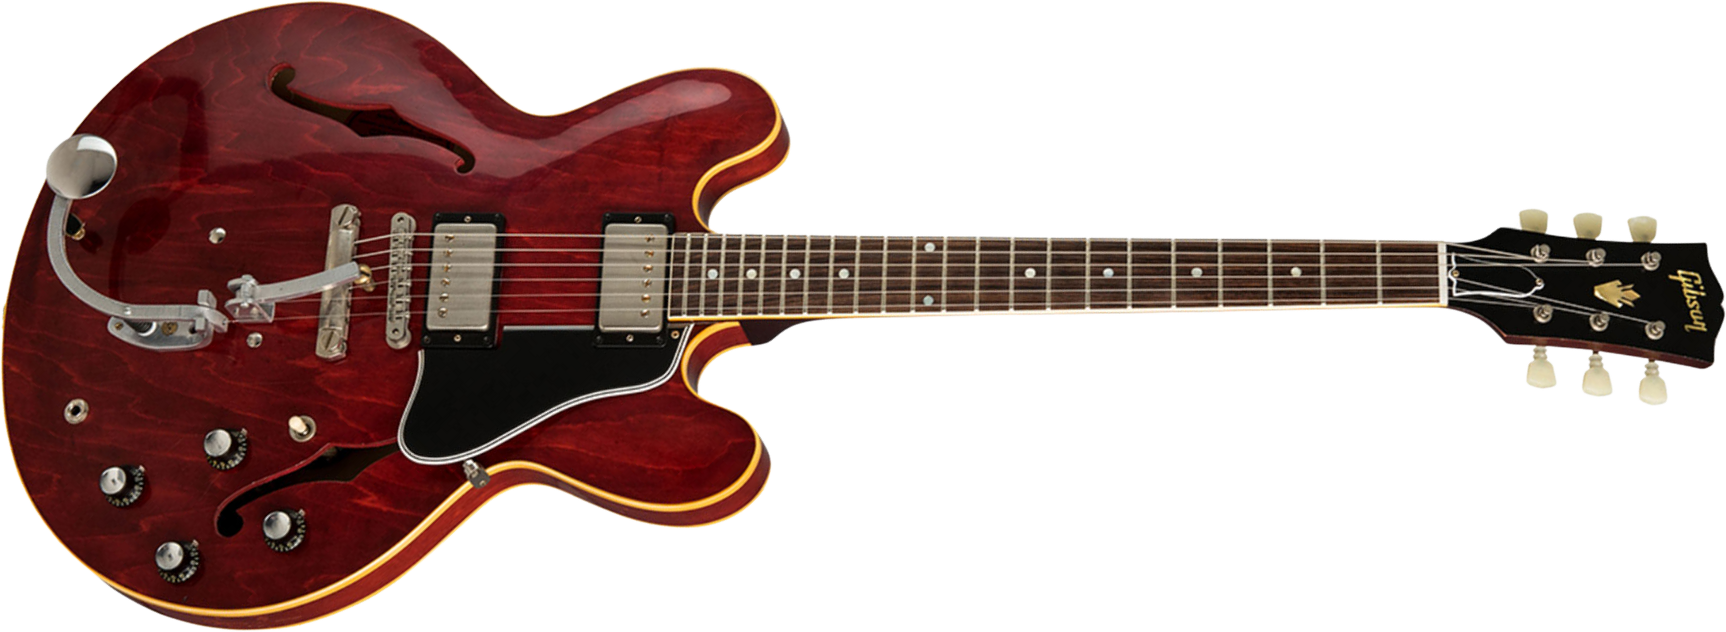 Gibson Custom Shop Jerry Kennedy Es-335 1961 Pretty Woman 2019 Ltd 2h Ht Rw - Aged Faded Cherry - Guitare Électrique Signature - Main picture